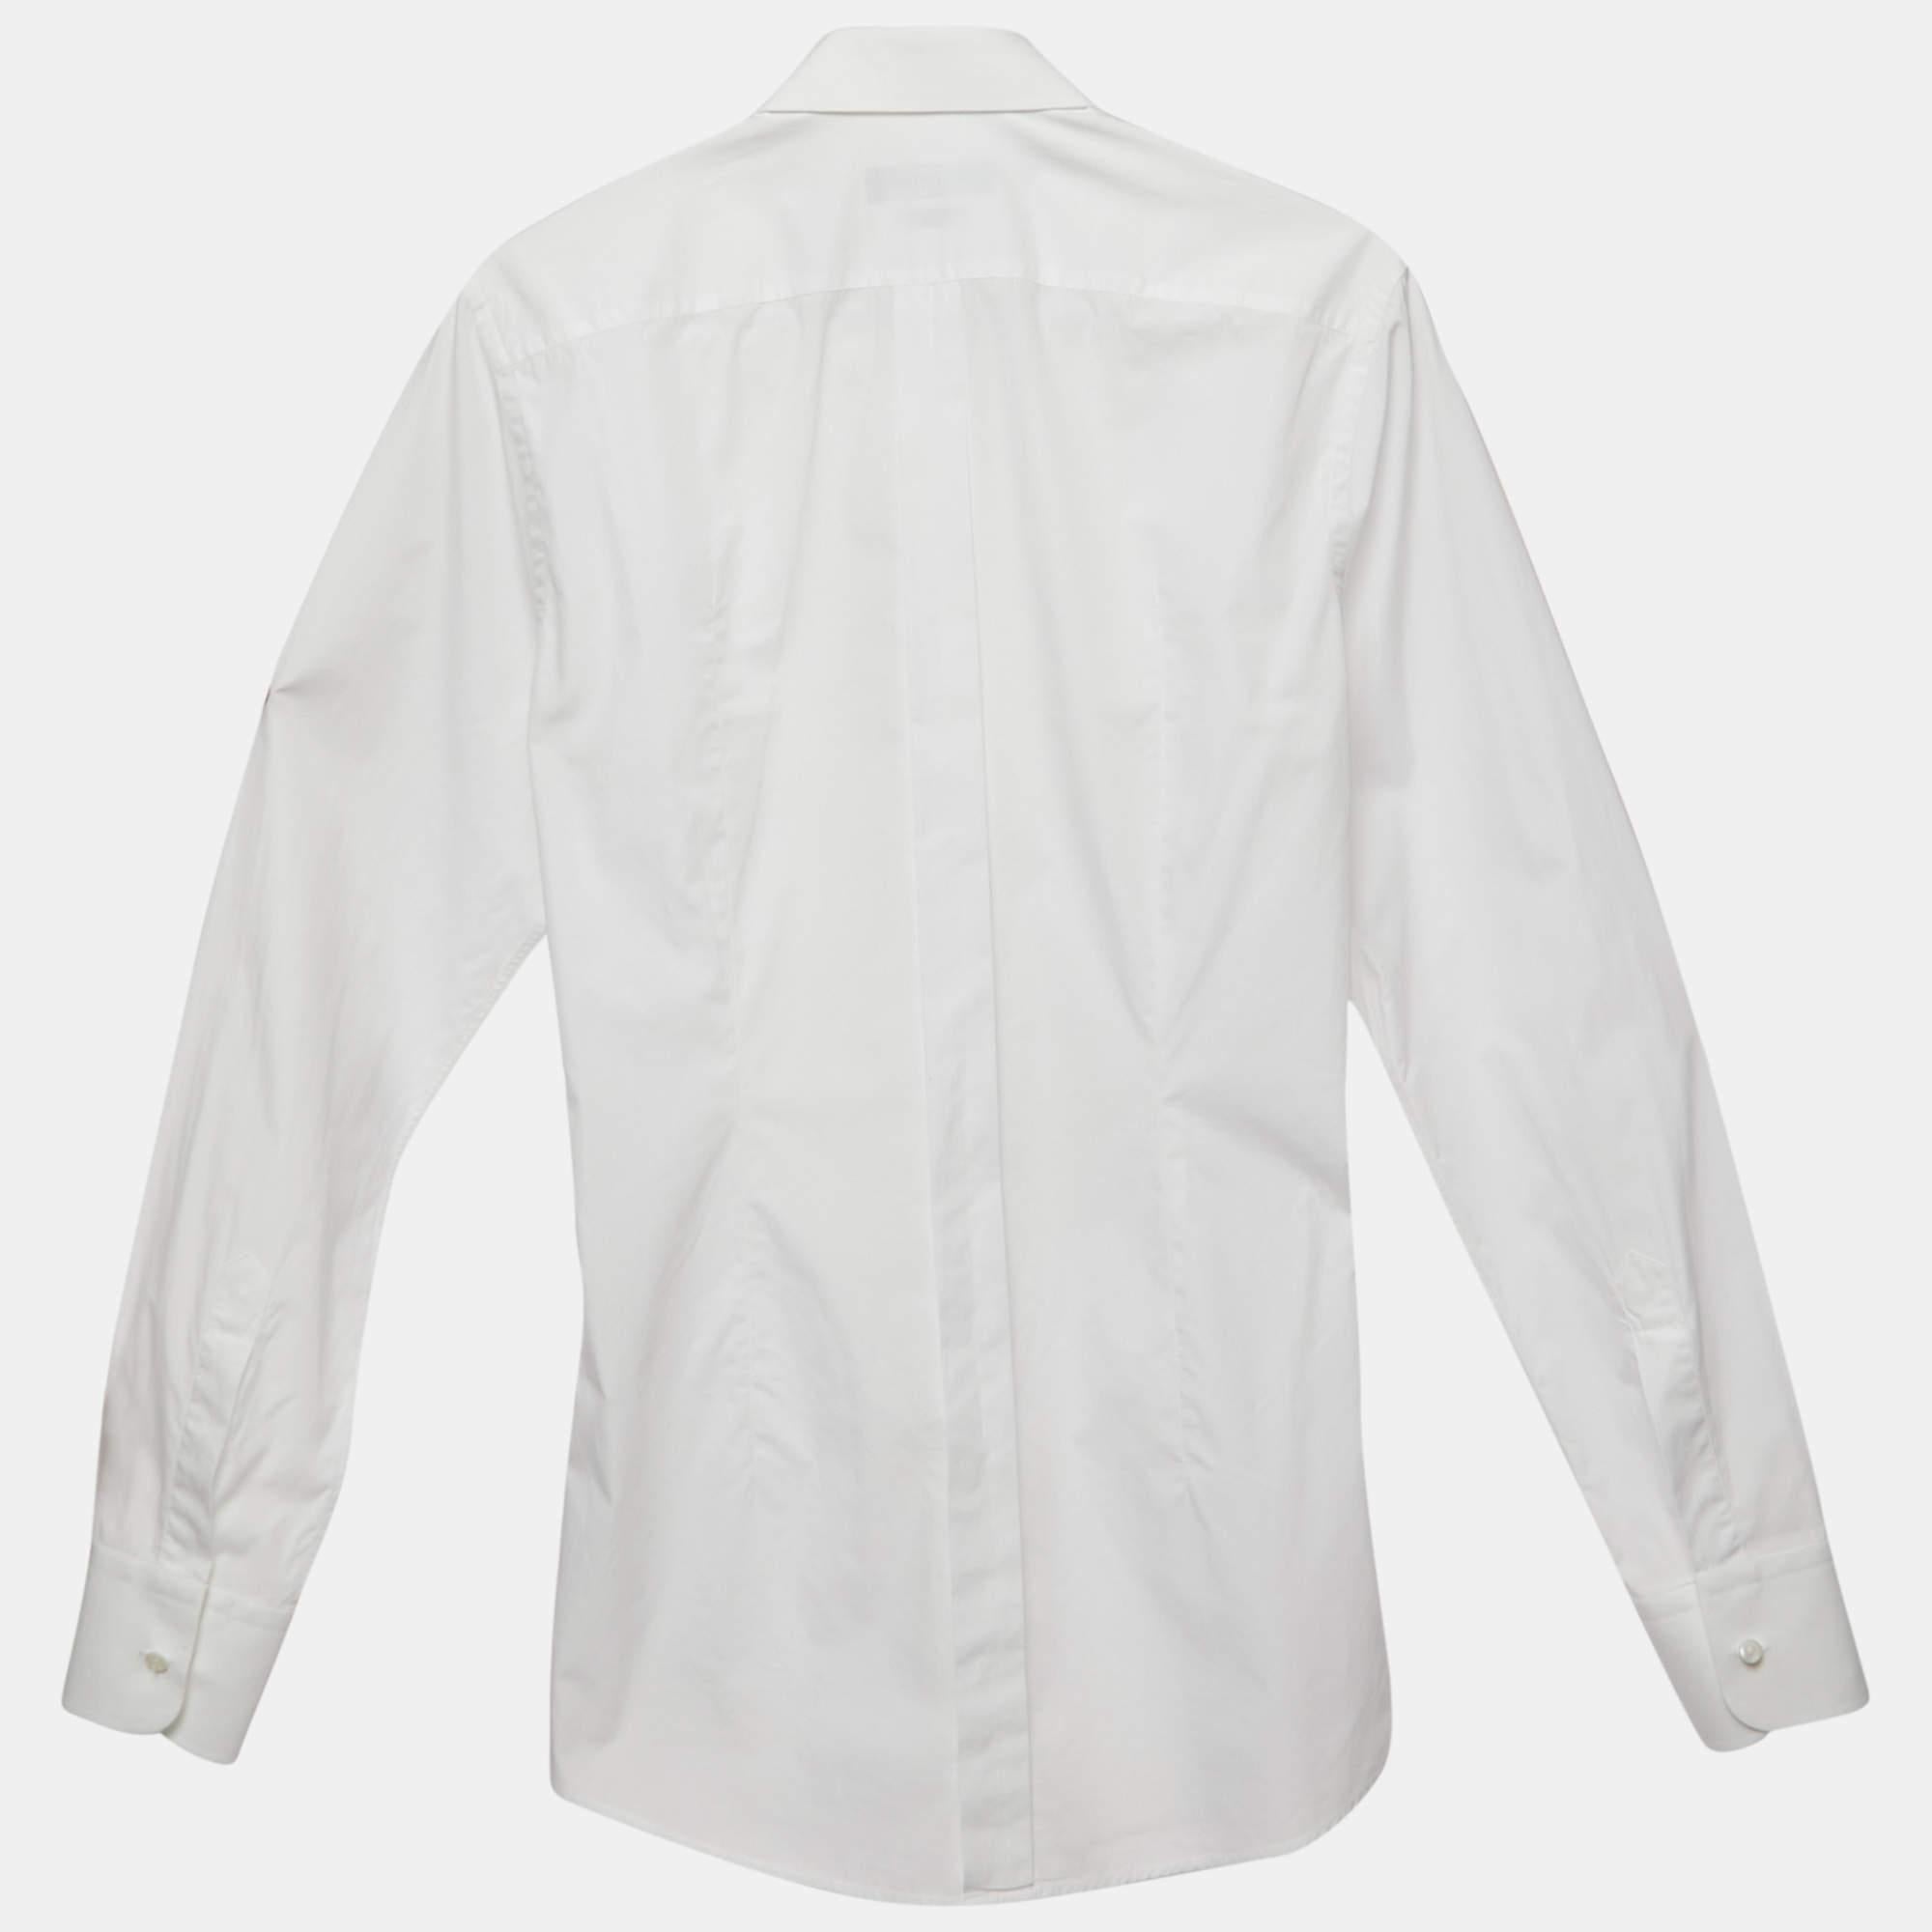 Shirts are an indispensable part of a wardrobe, so this brand brings you a creation that is both versatile and stylish. It has been tailored from quality material in a versatile shade. The shirt is detailed with signature elements and a comfortable